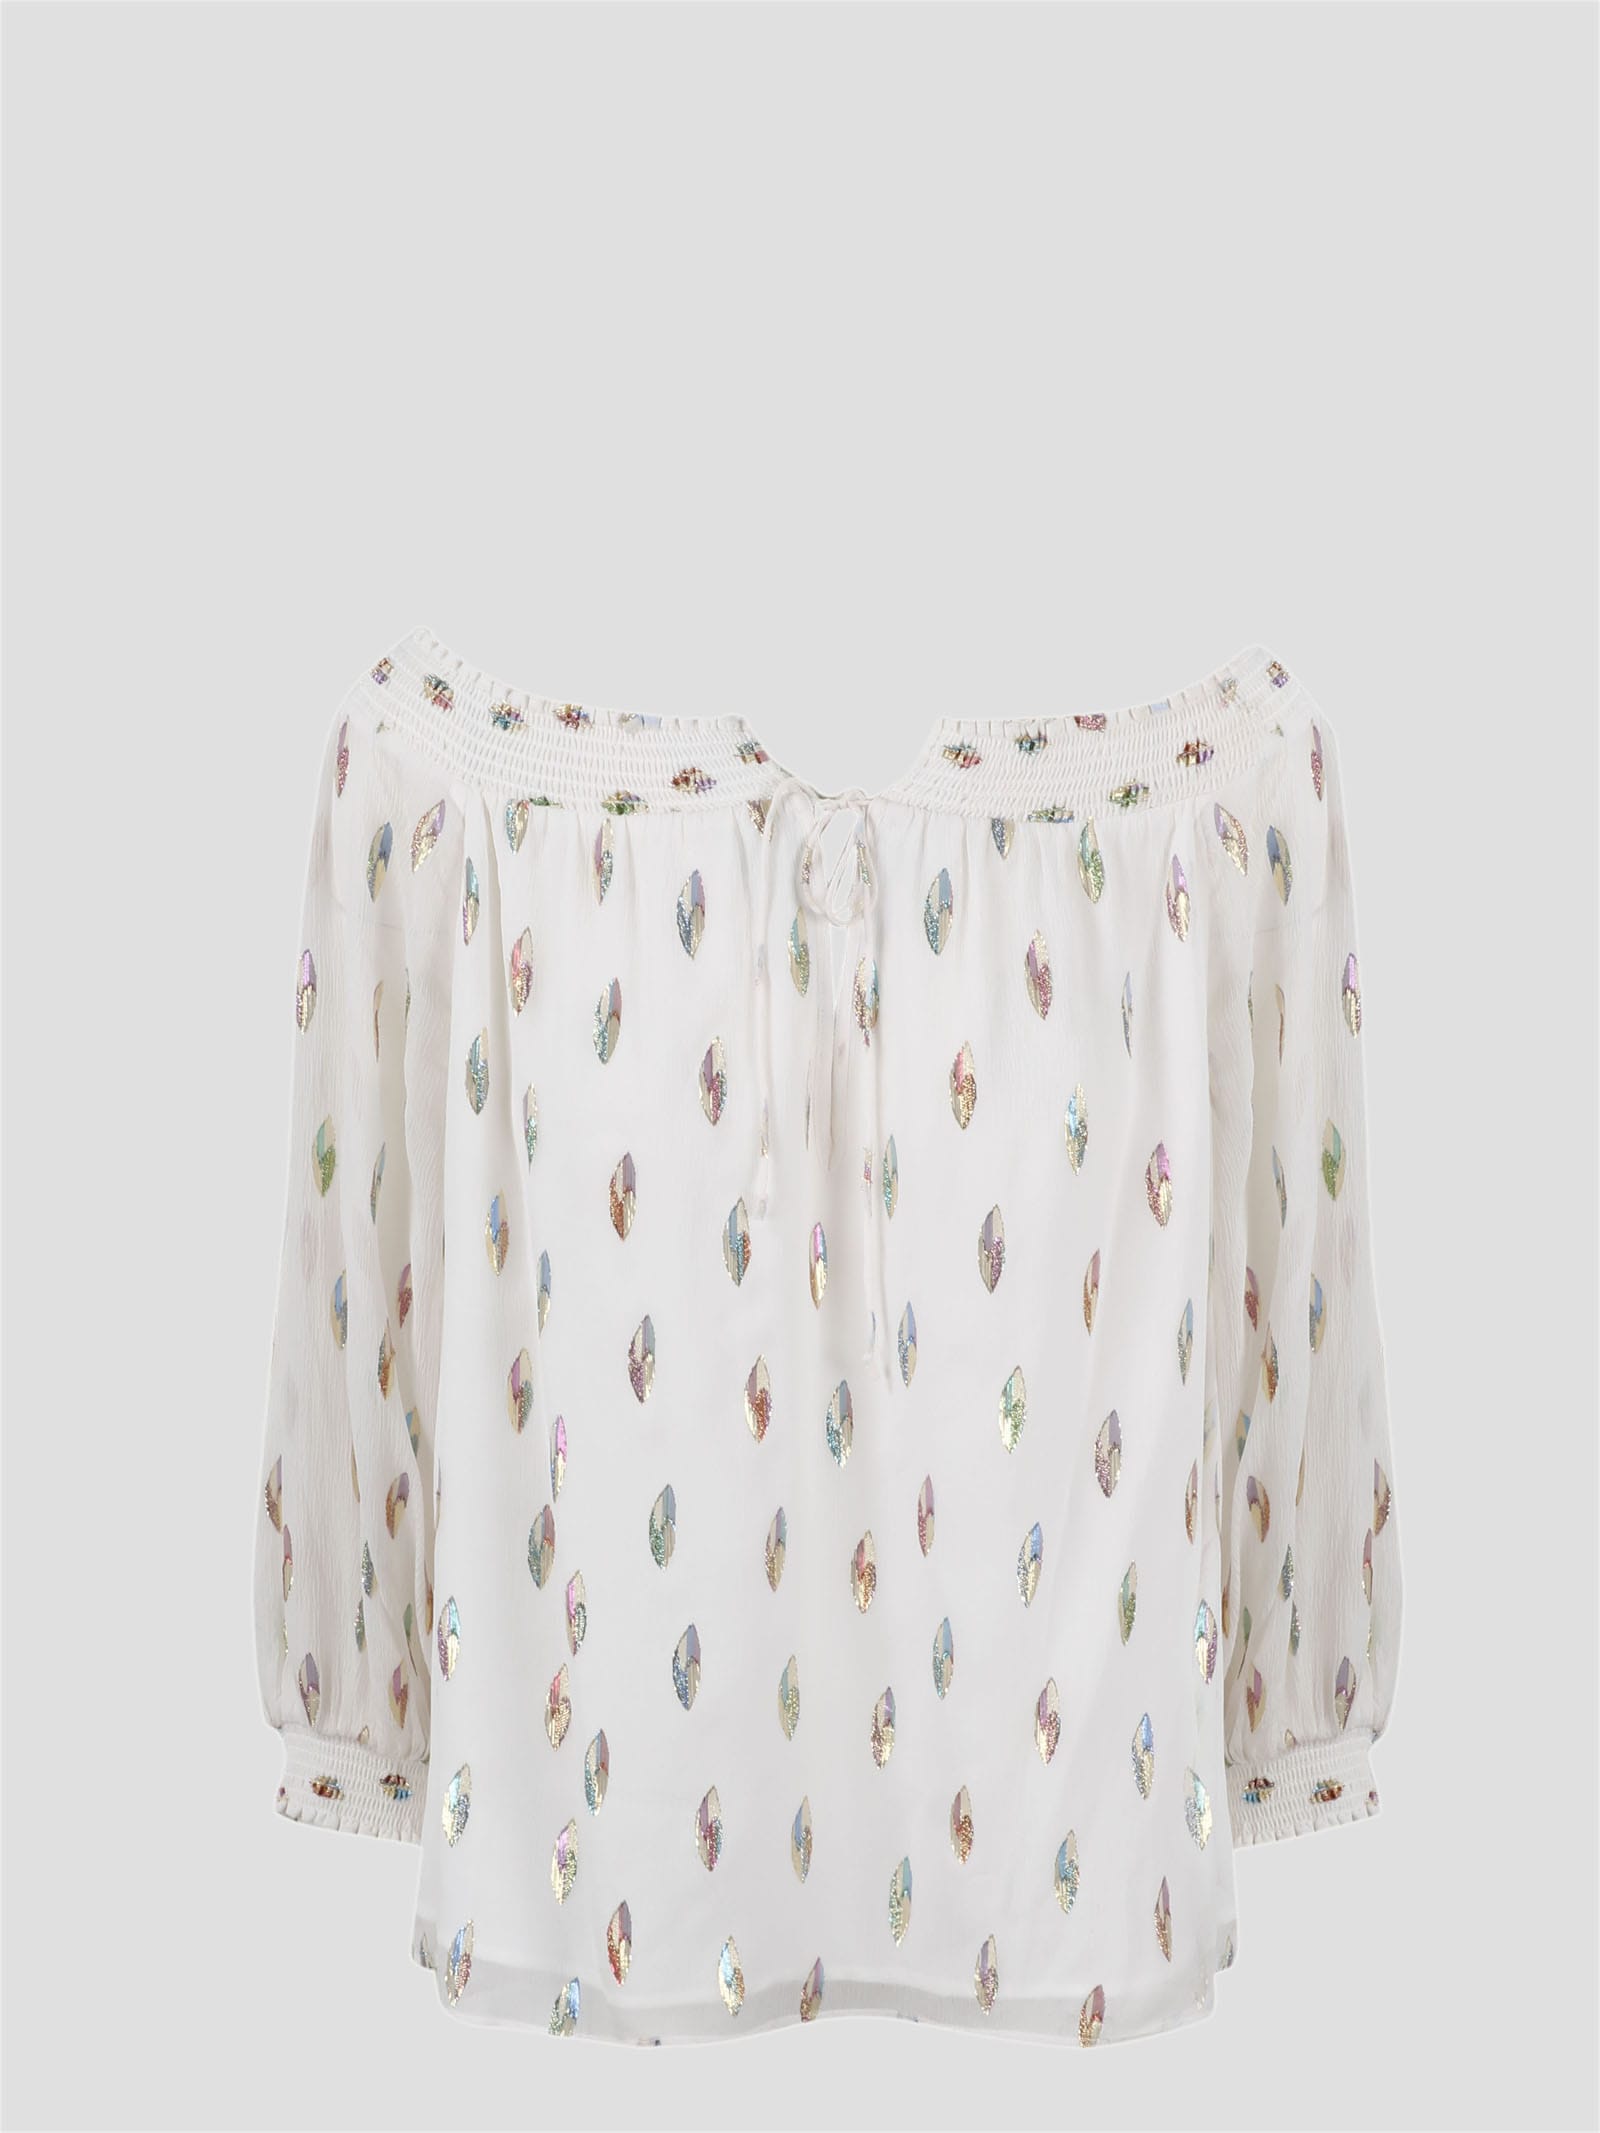 SEE BY CHLOÉ Blouses | ModeSens